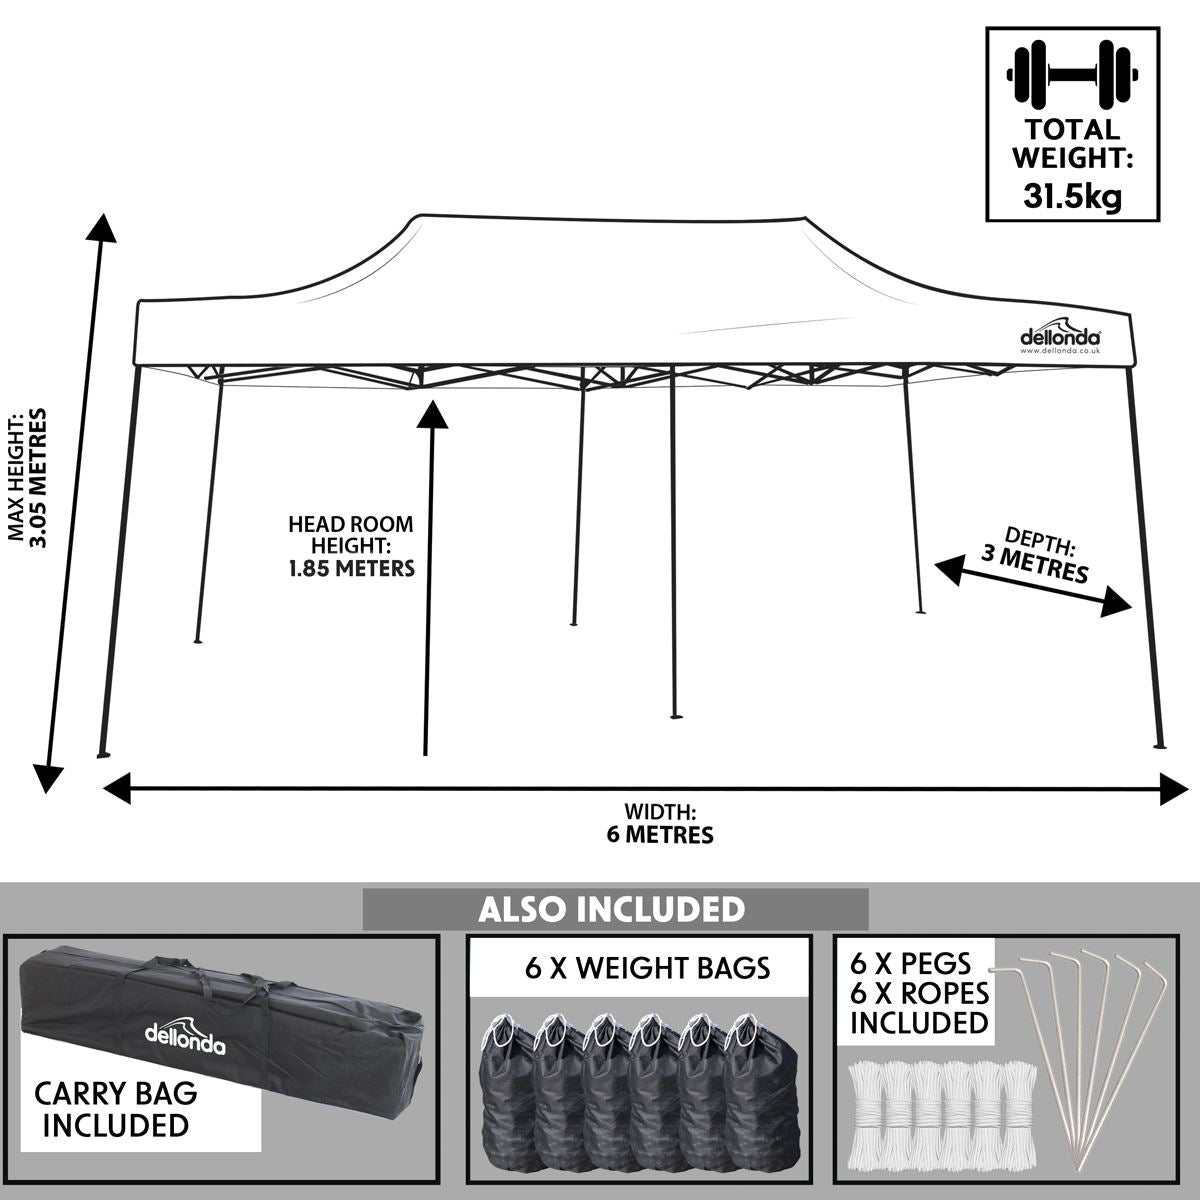 Dellonda Premium 3x6m Pop-Up Gazebo, Heavy Duty, PVC Coated, Water Resistant Fabric, Supplied with Carry Bag, Rope, Stakes & Weight Bags - Dark Green Canopy